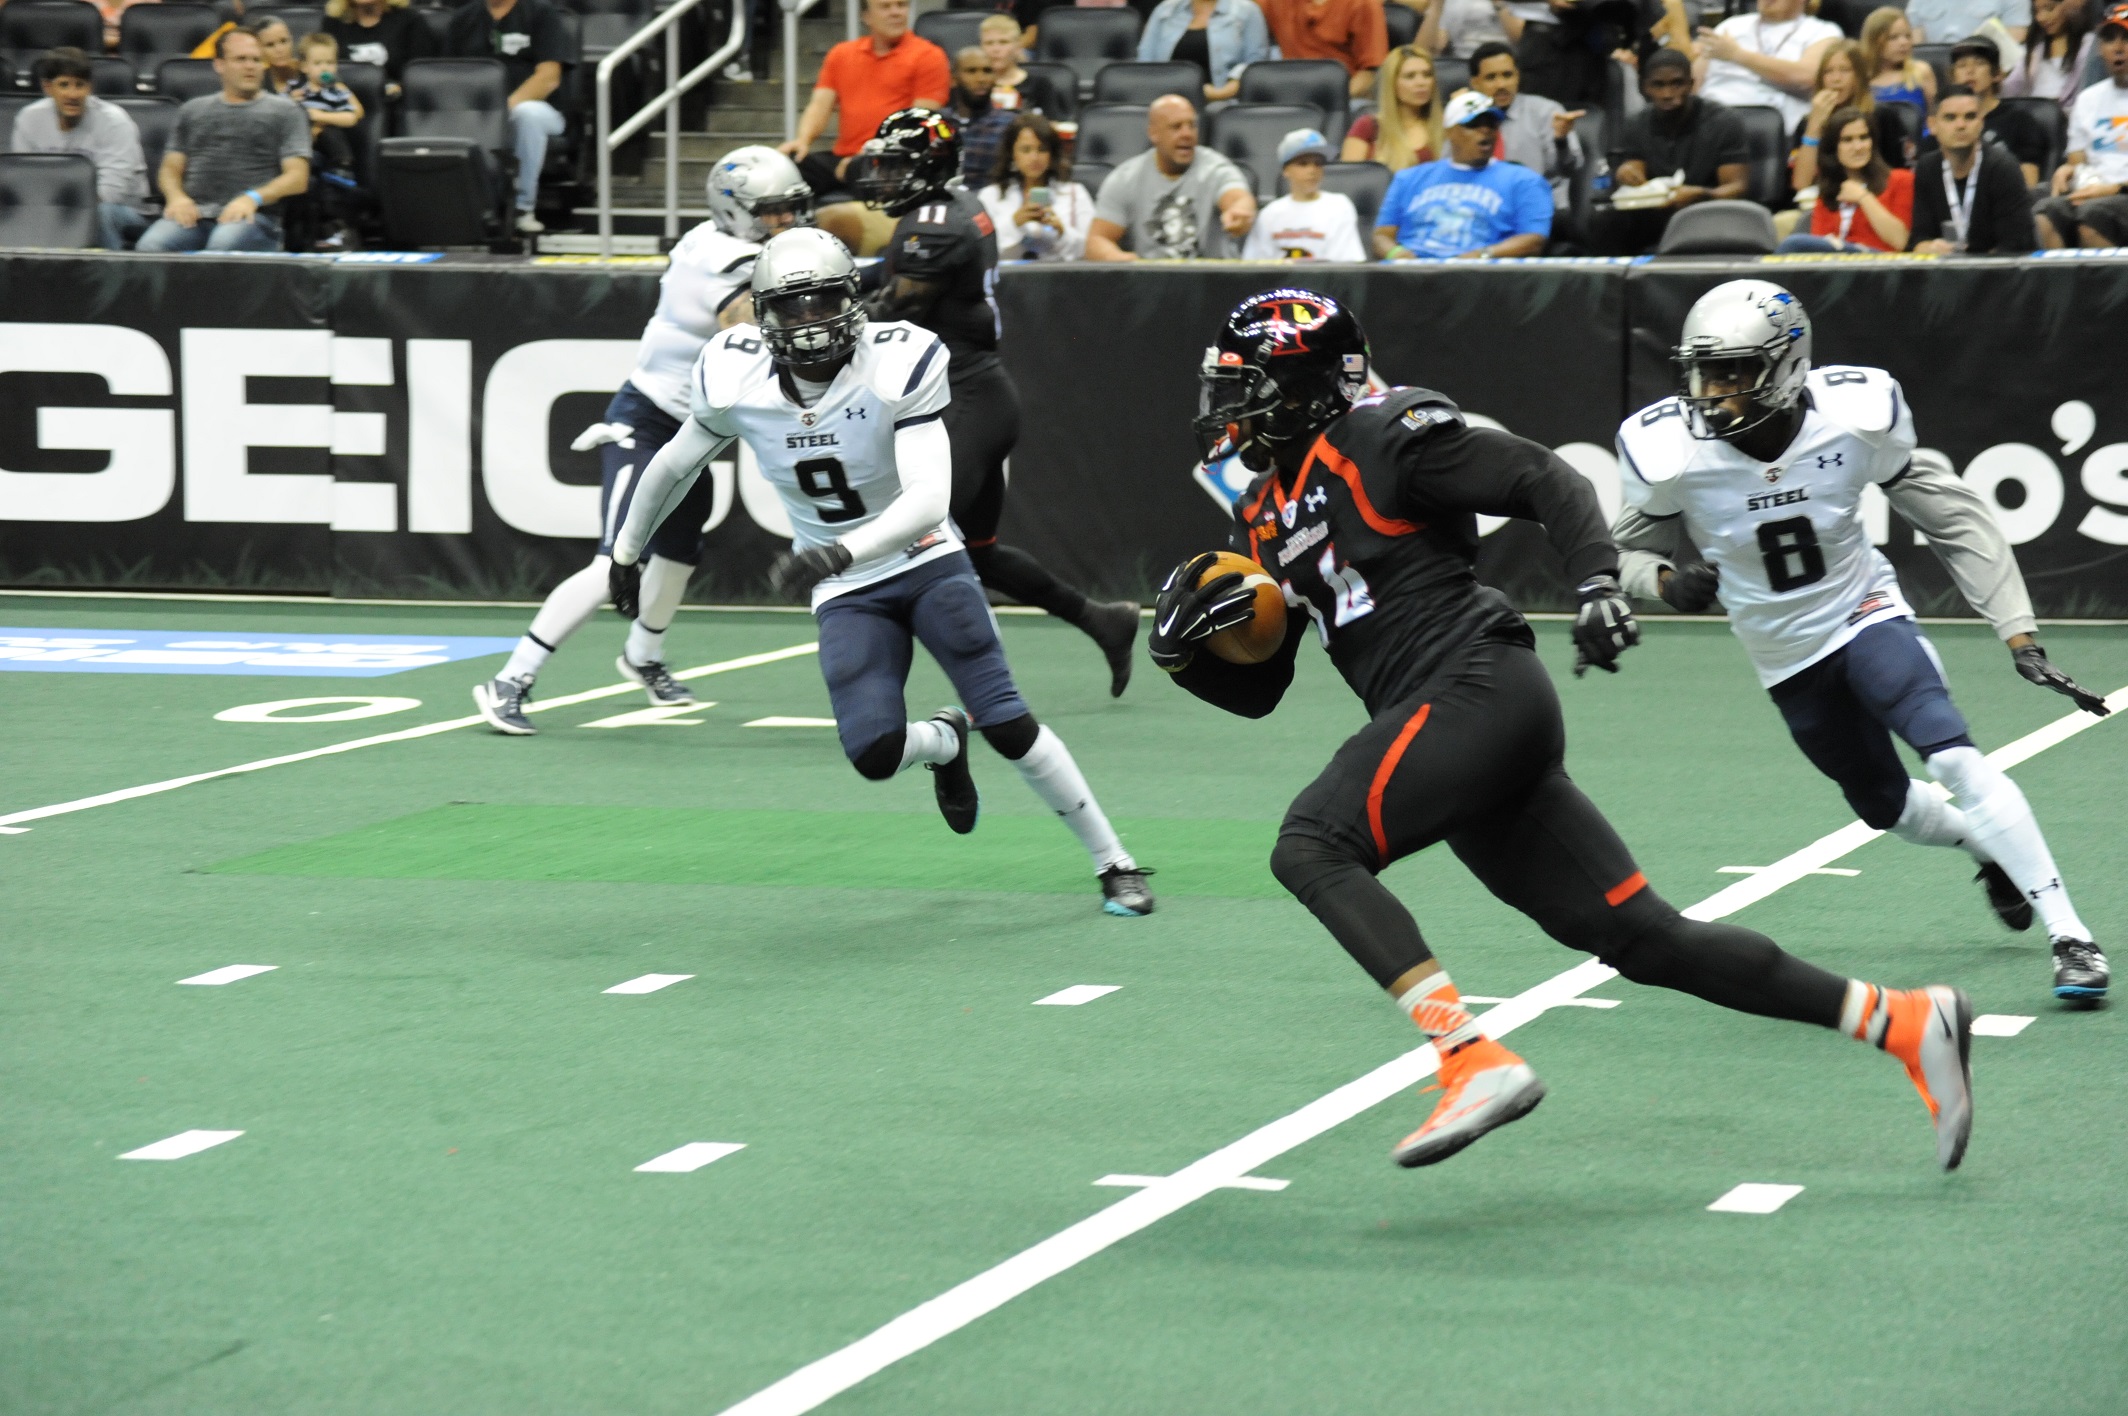 New owner to move Orlando Predators back to Amway